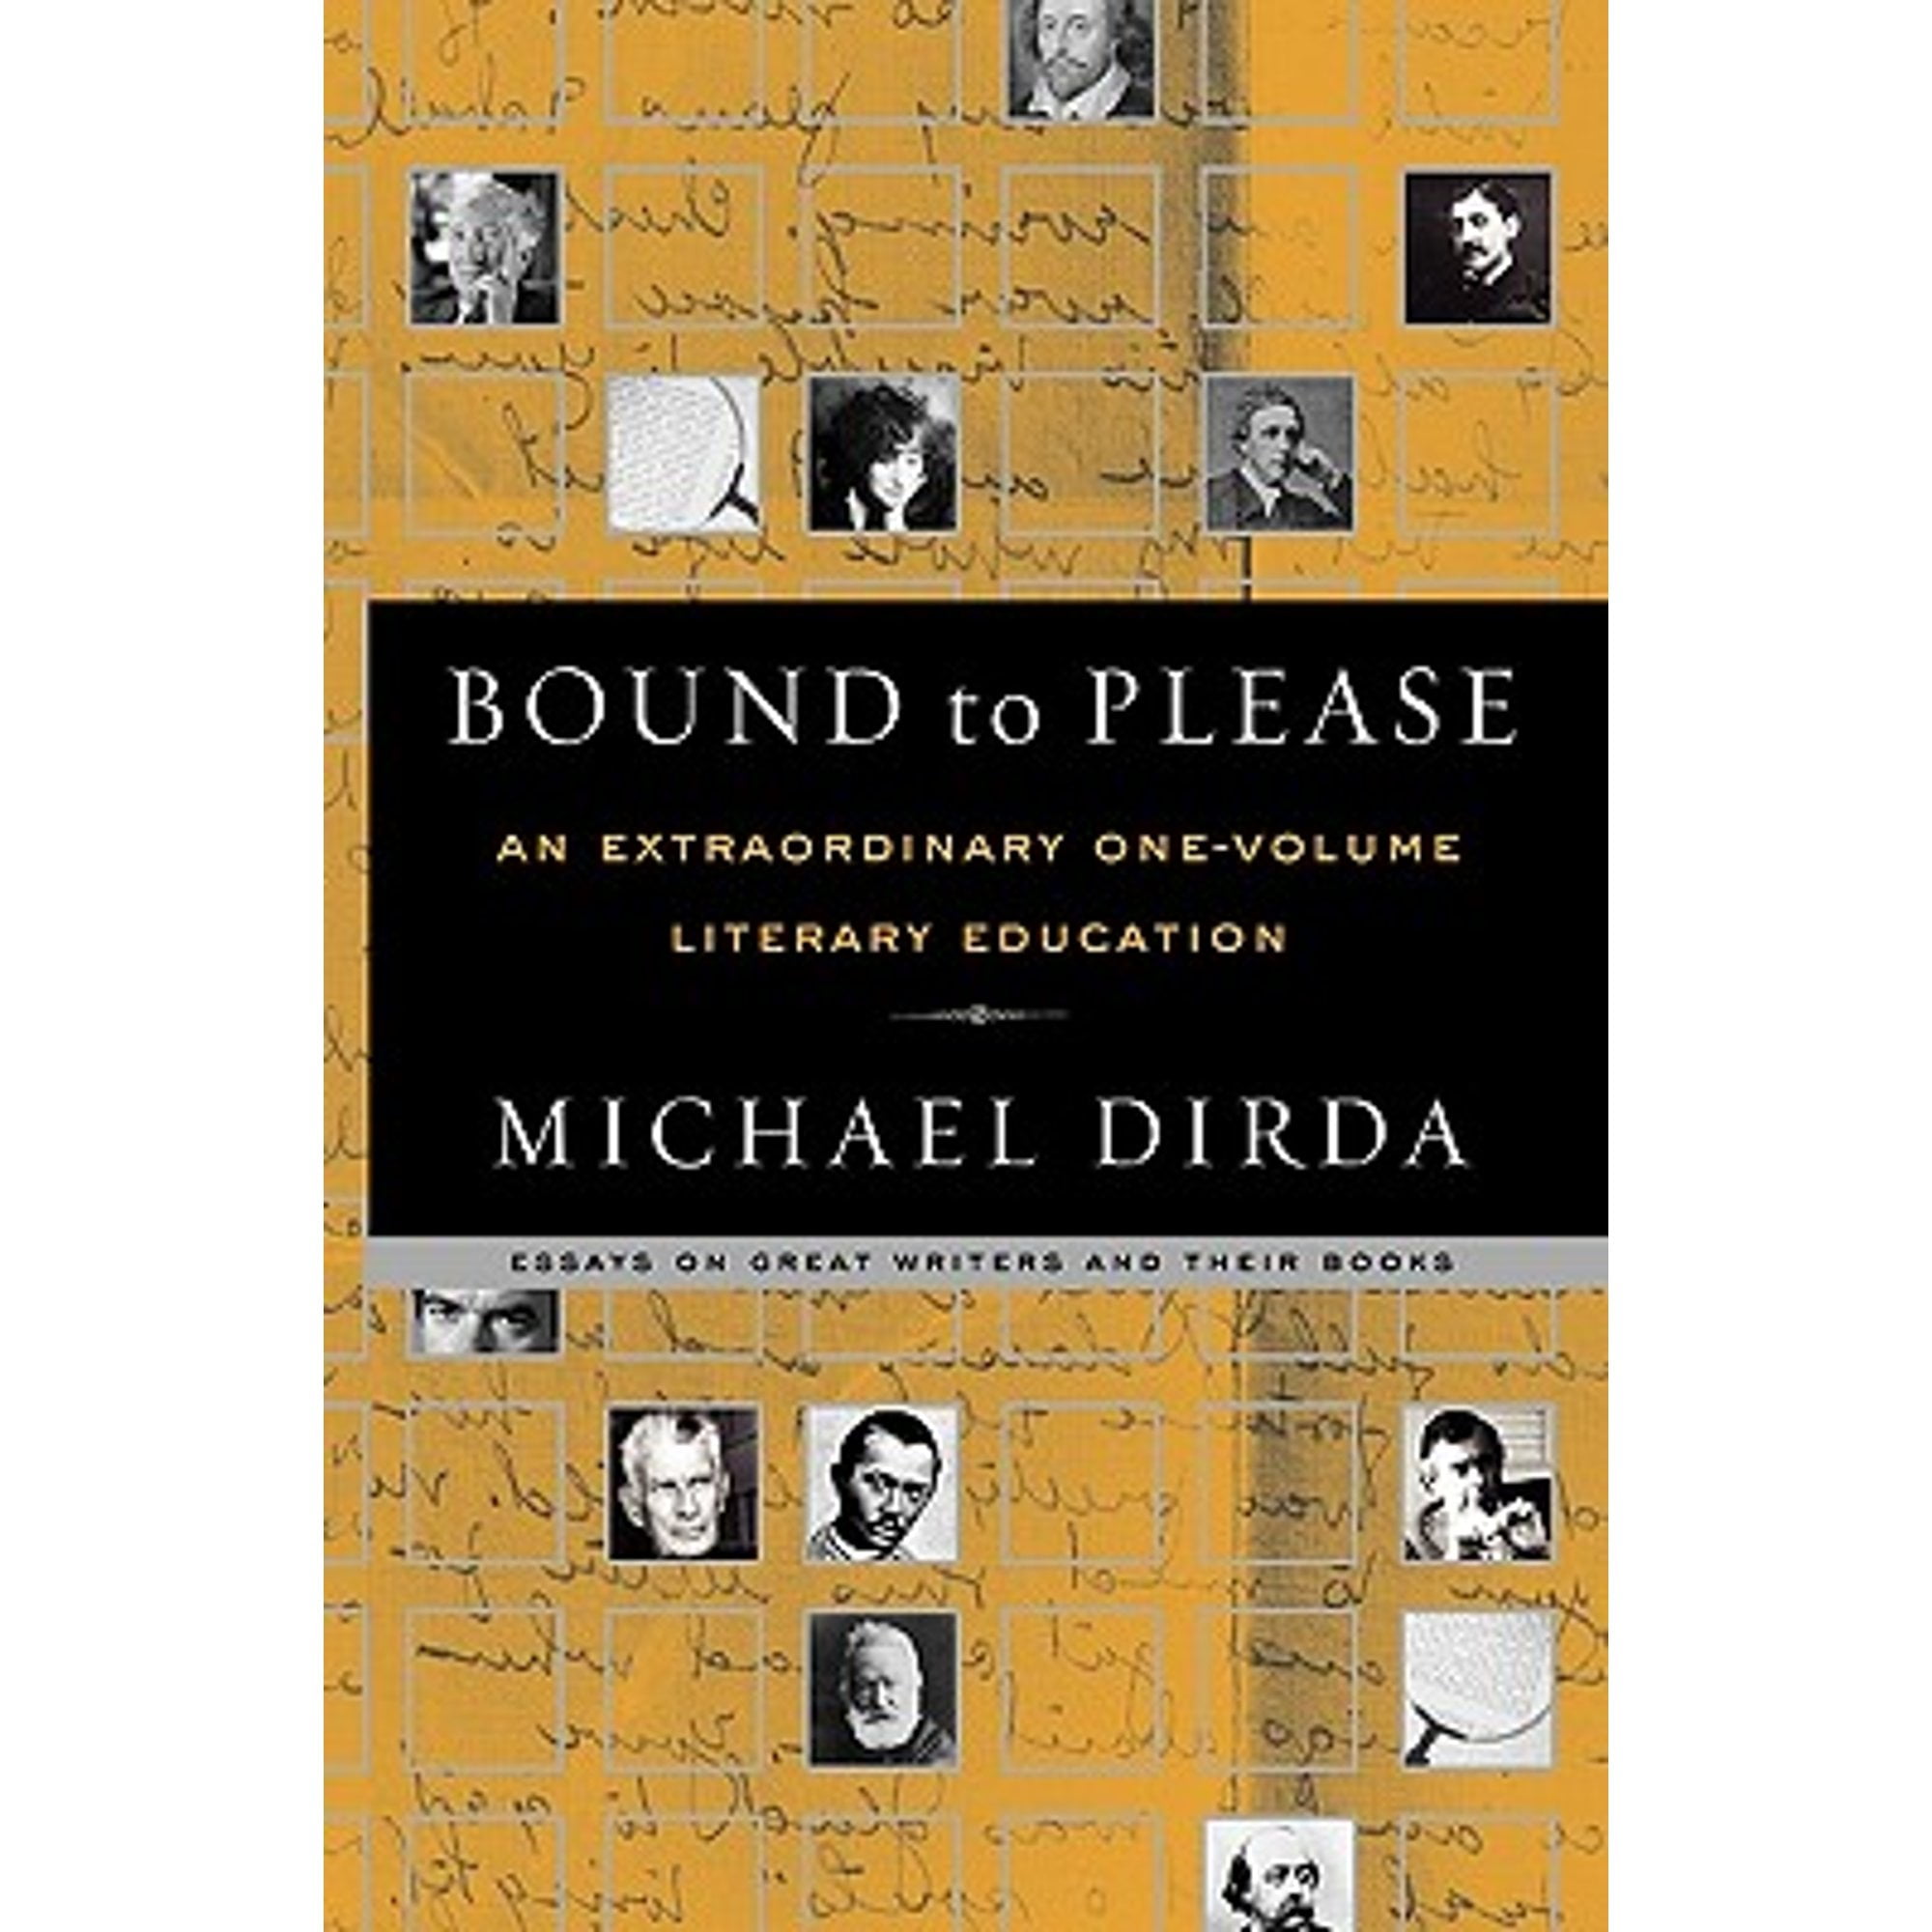 a literary education and other essays